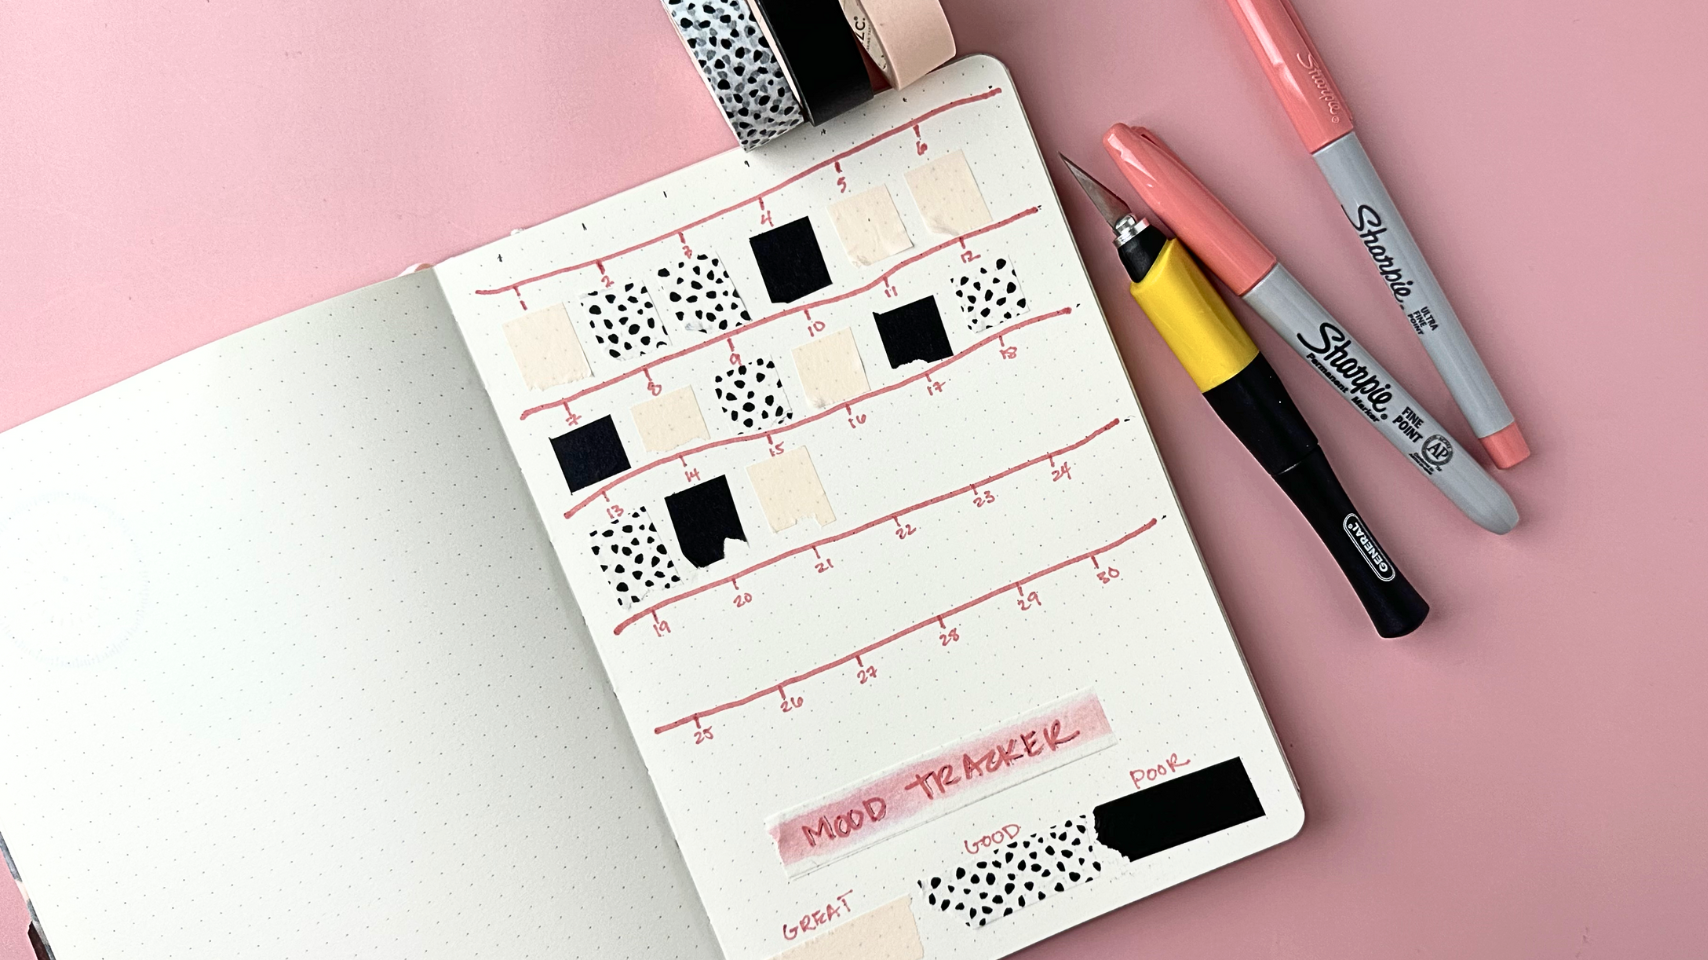 This image is a simple mood tracker made with Washi tape. BBB Supplies Craft Shop brings you another great tip for washi Wednesday.